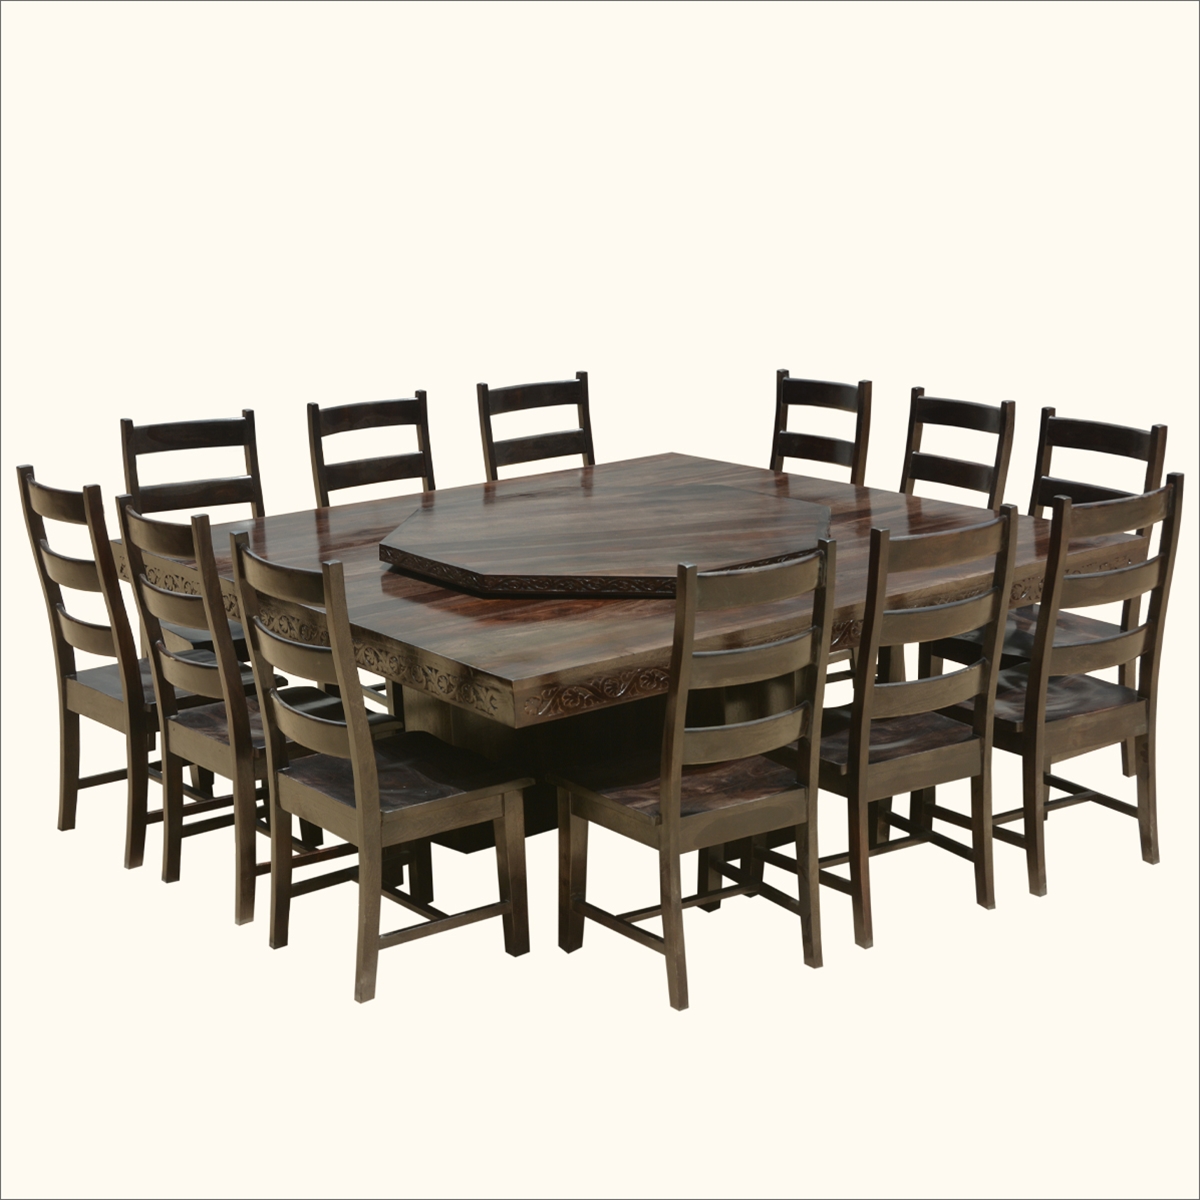 Square dining table for 4